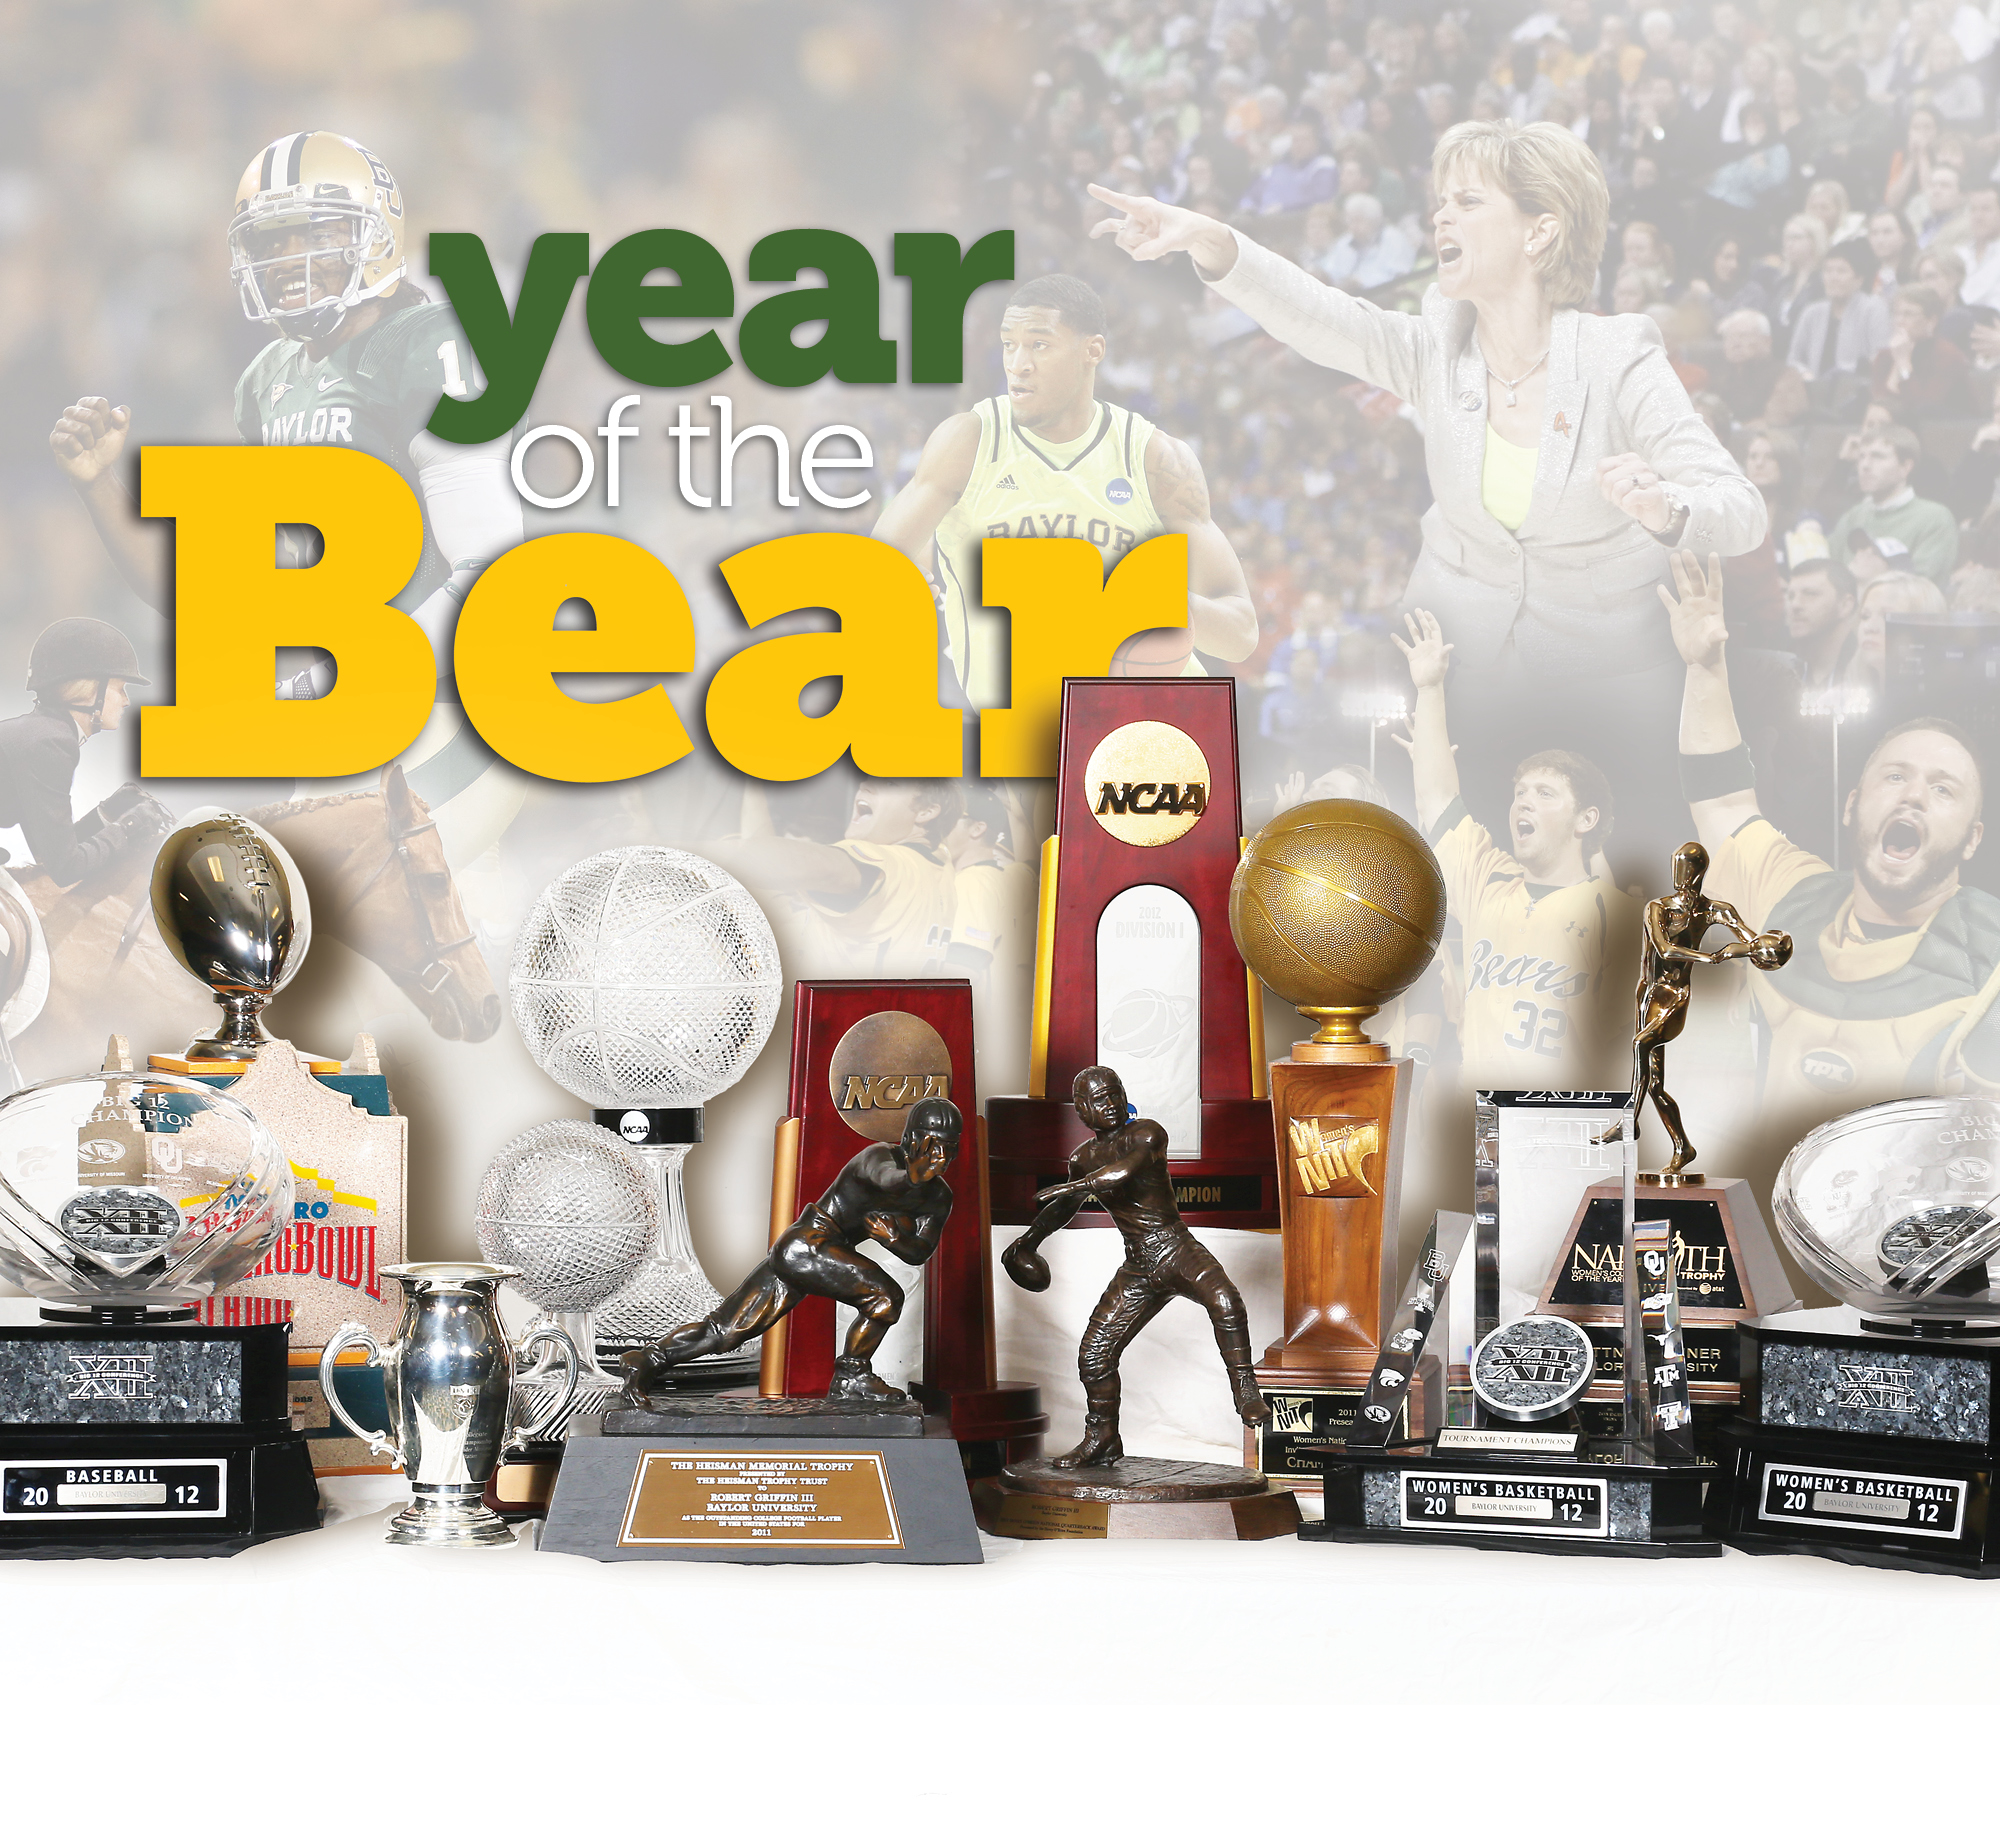 Year of the Bear featuring baylor athletics